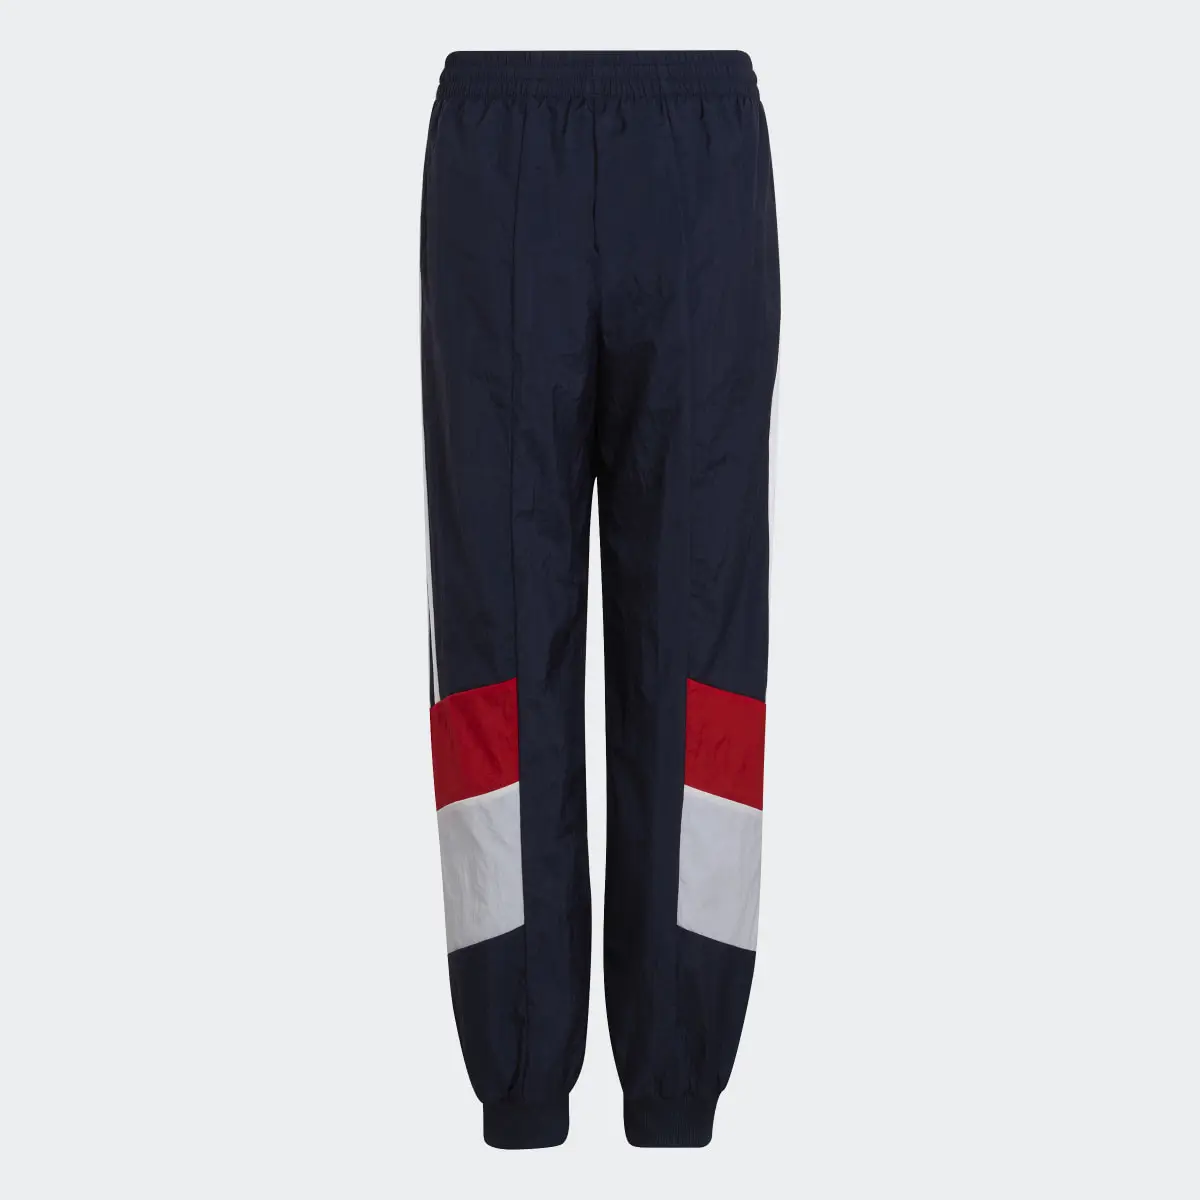 Adidas Colorblock Woven Tracksuit Bottoms. 2